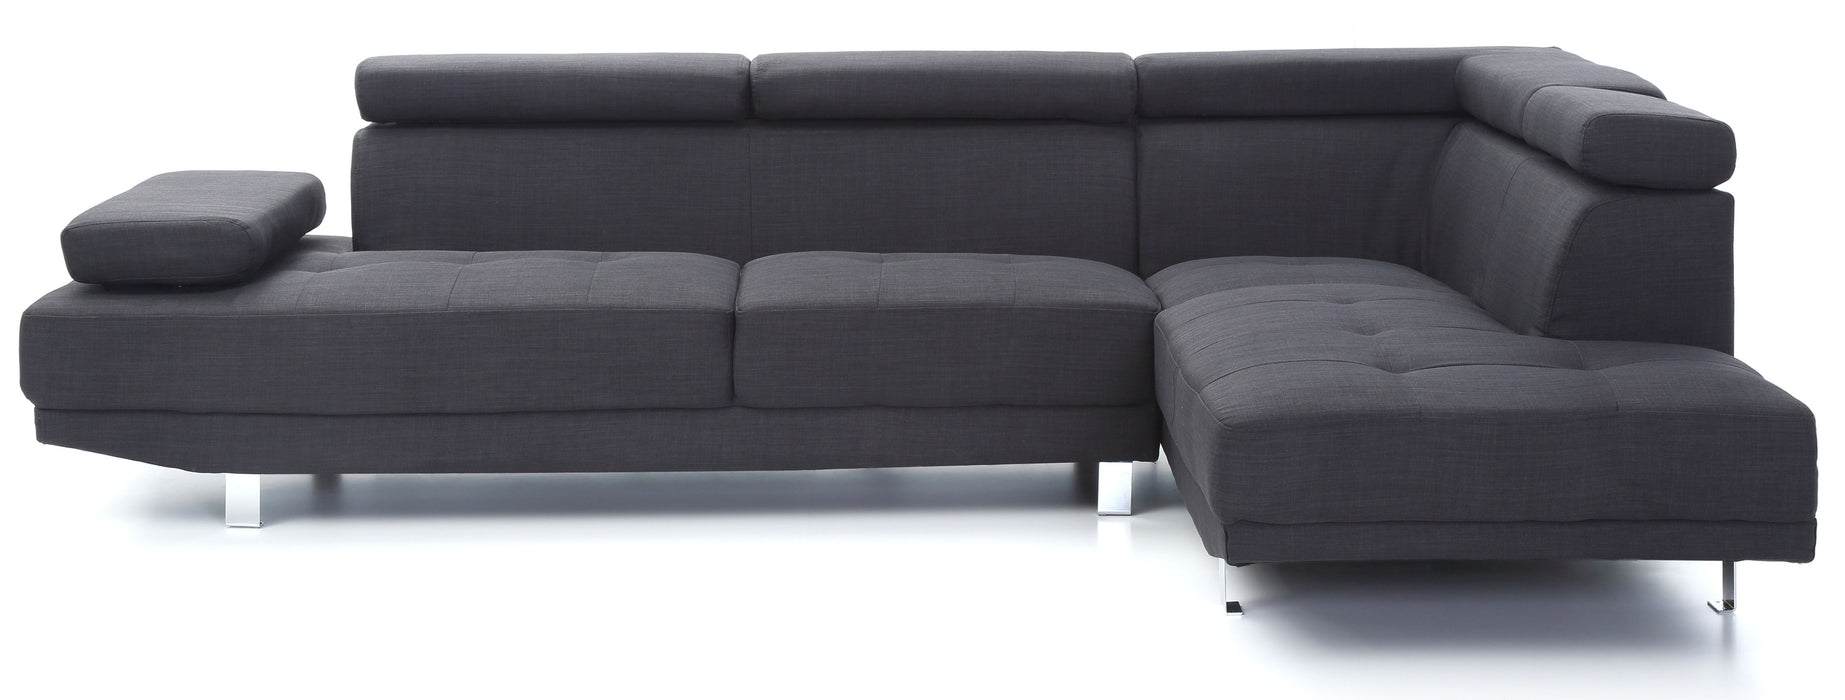 Glory Furniture Riveredge Sectional (2 Boxes) - Black - Fabric